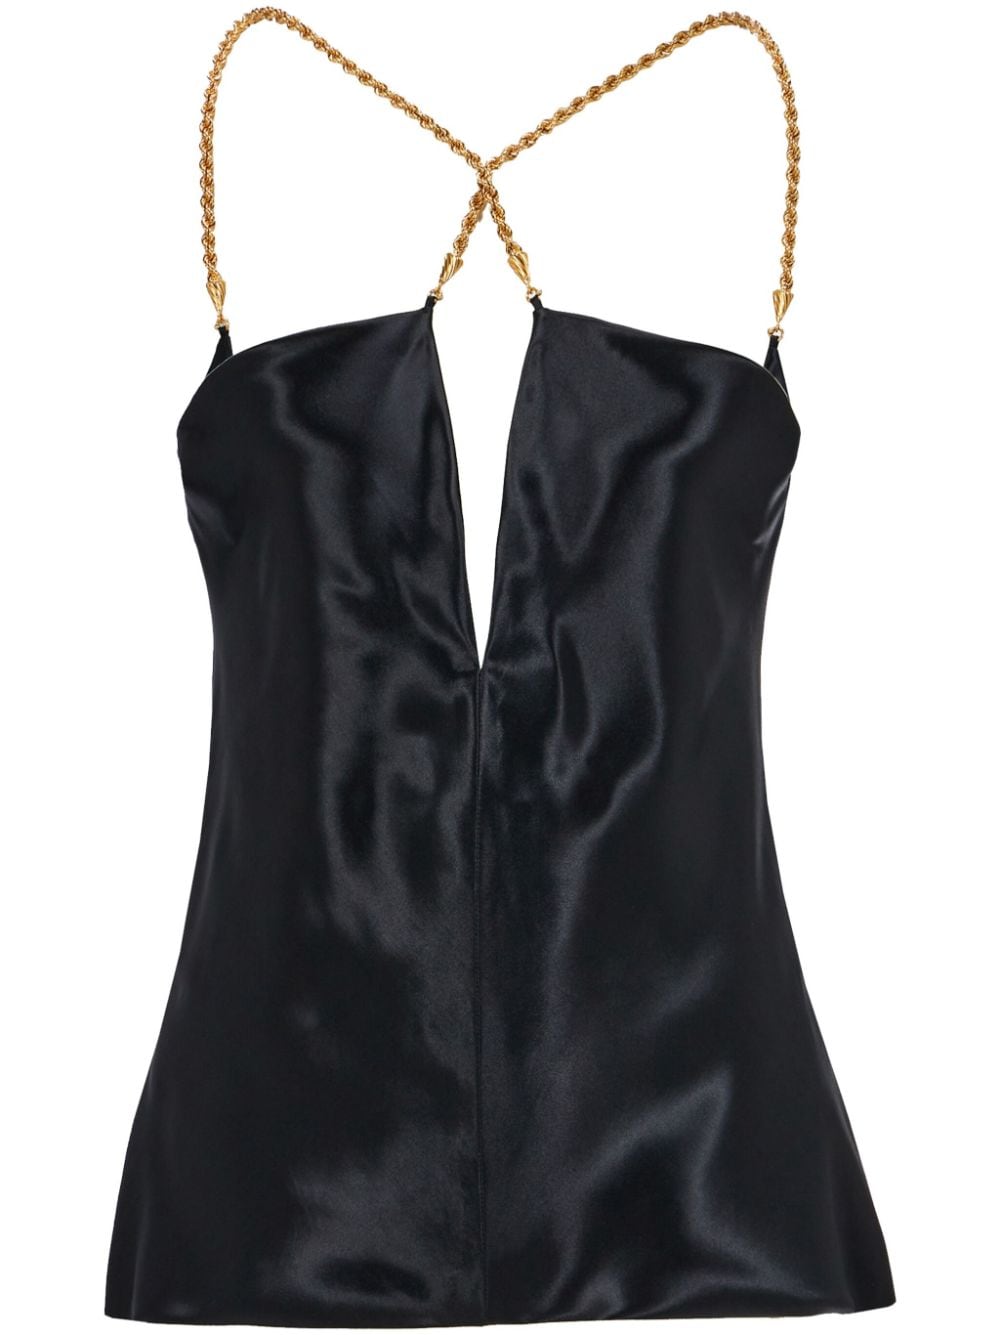 FERRAGAMO Satin Sleeveless Top with Cut-Out Detailing and Crossover Neck for Women